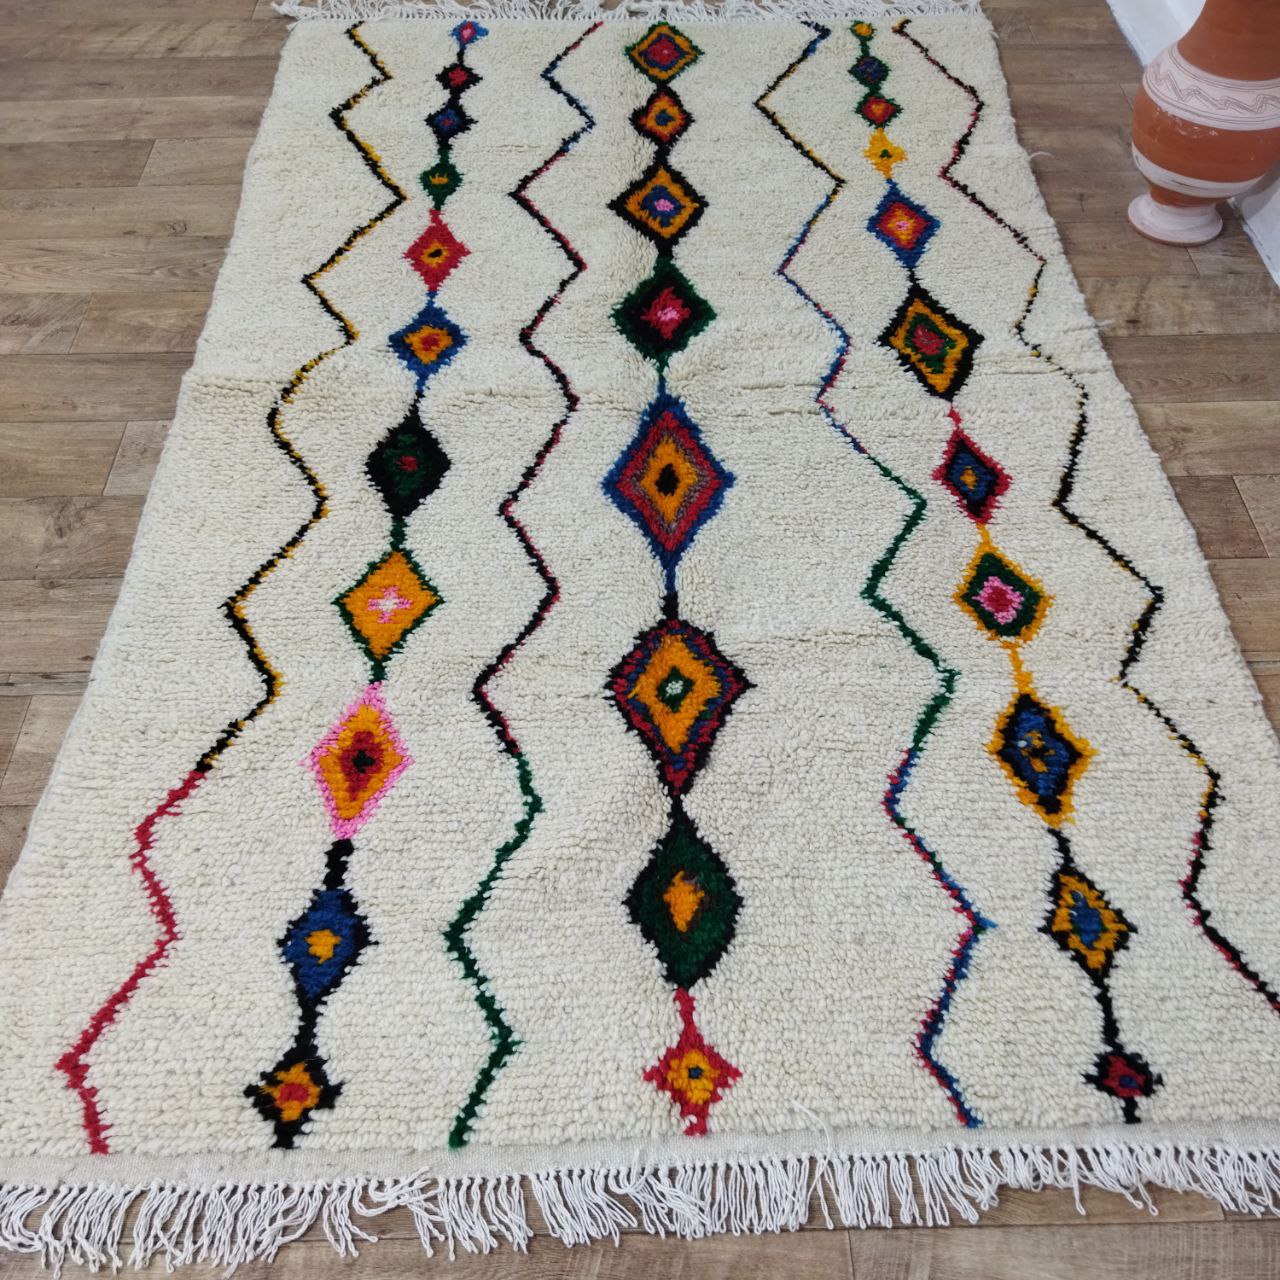 Authentic Colorful Rug 5x8 Ft - Moroccan Wool Berber Carpet